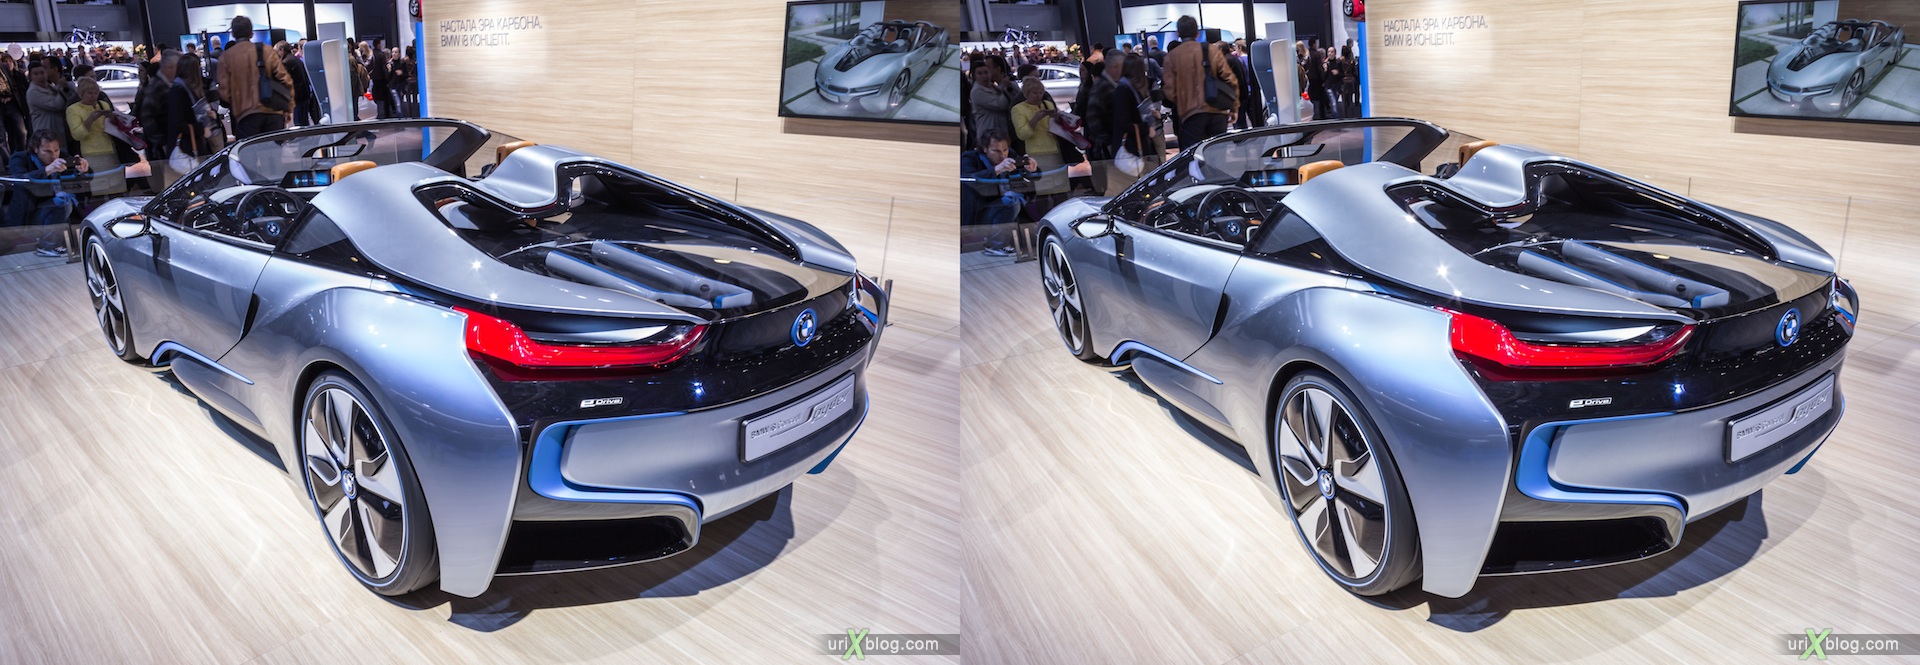 2012, BMW i8 Concept Spyder, Moscow International Automobile Salon, auto show, 3D, stereo pair, cross-eyed, crossview